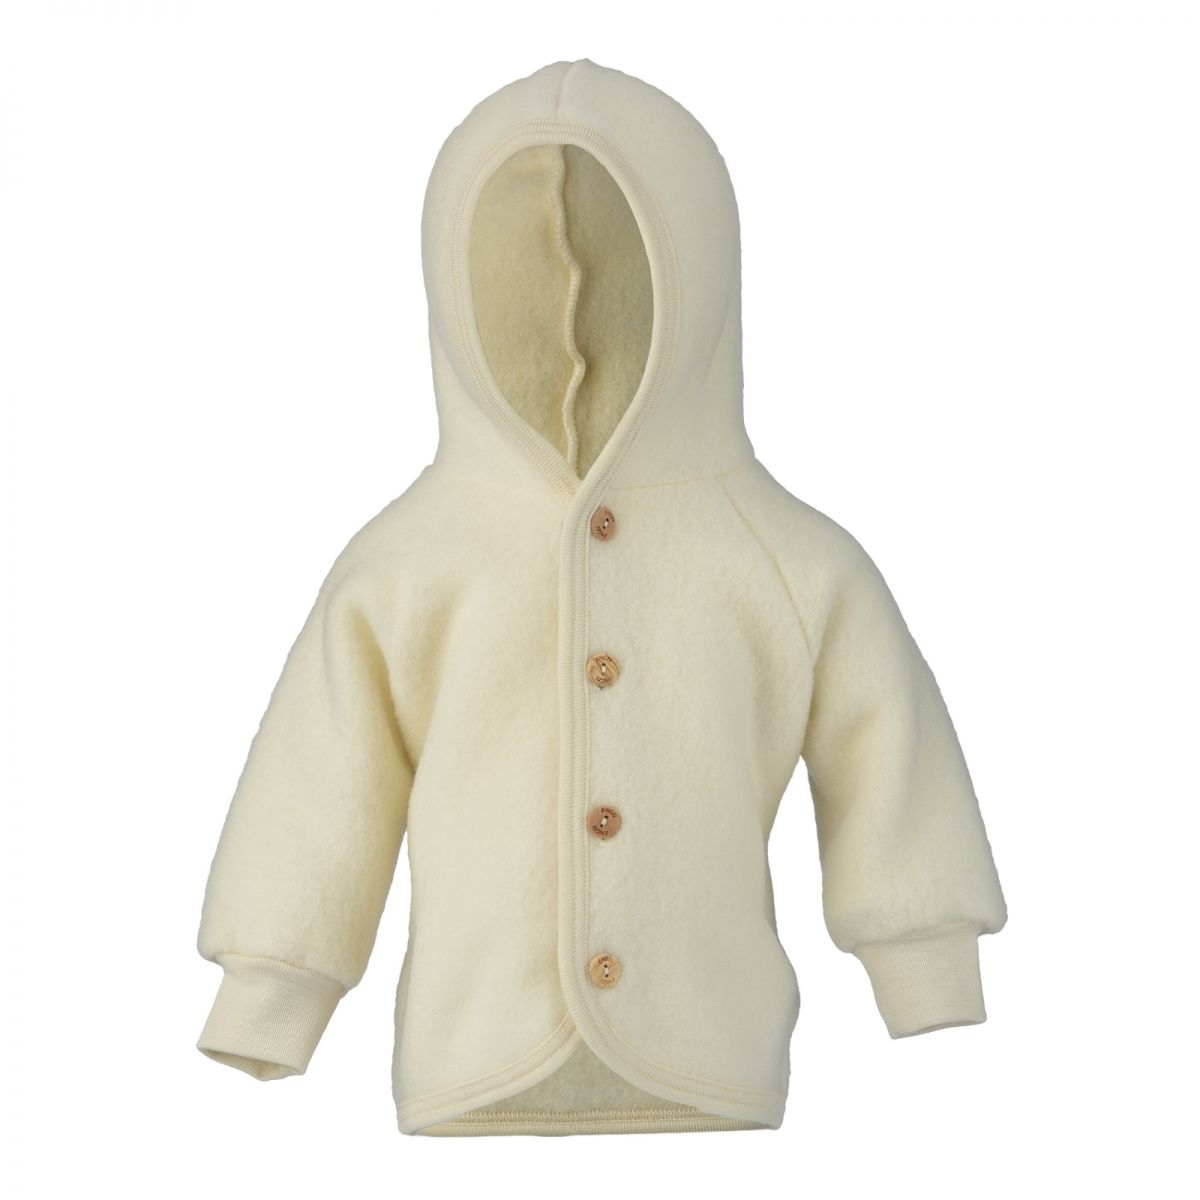 ENGEL Natur Hooded jacket with wooden buttons Natural 575520-01 